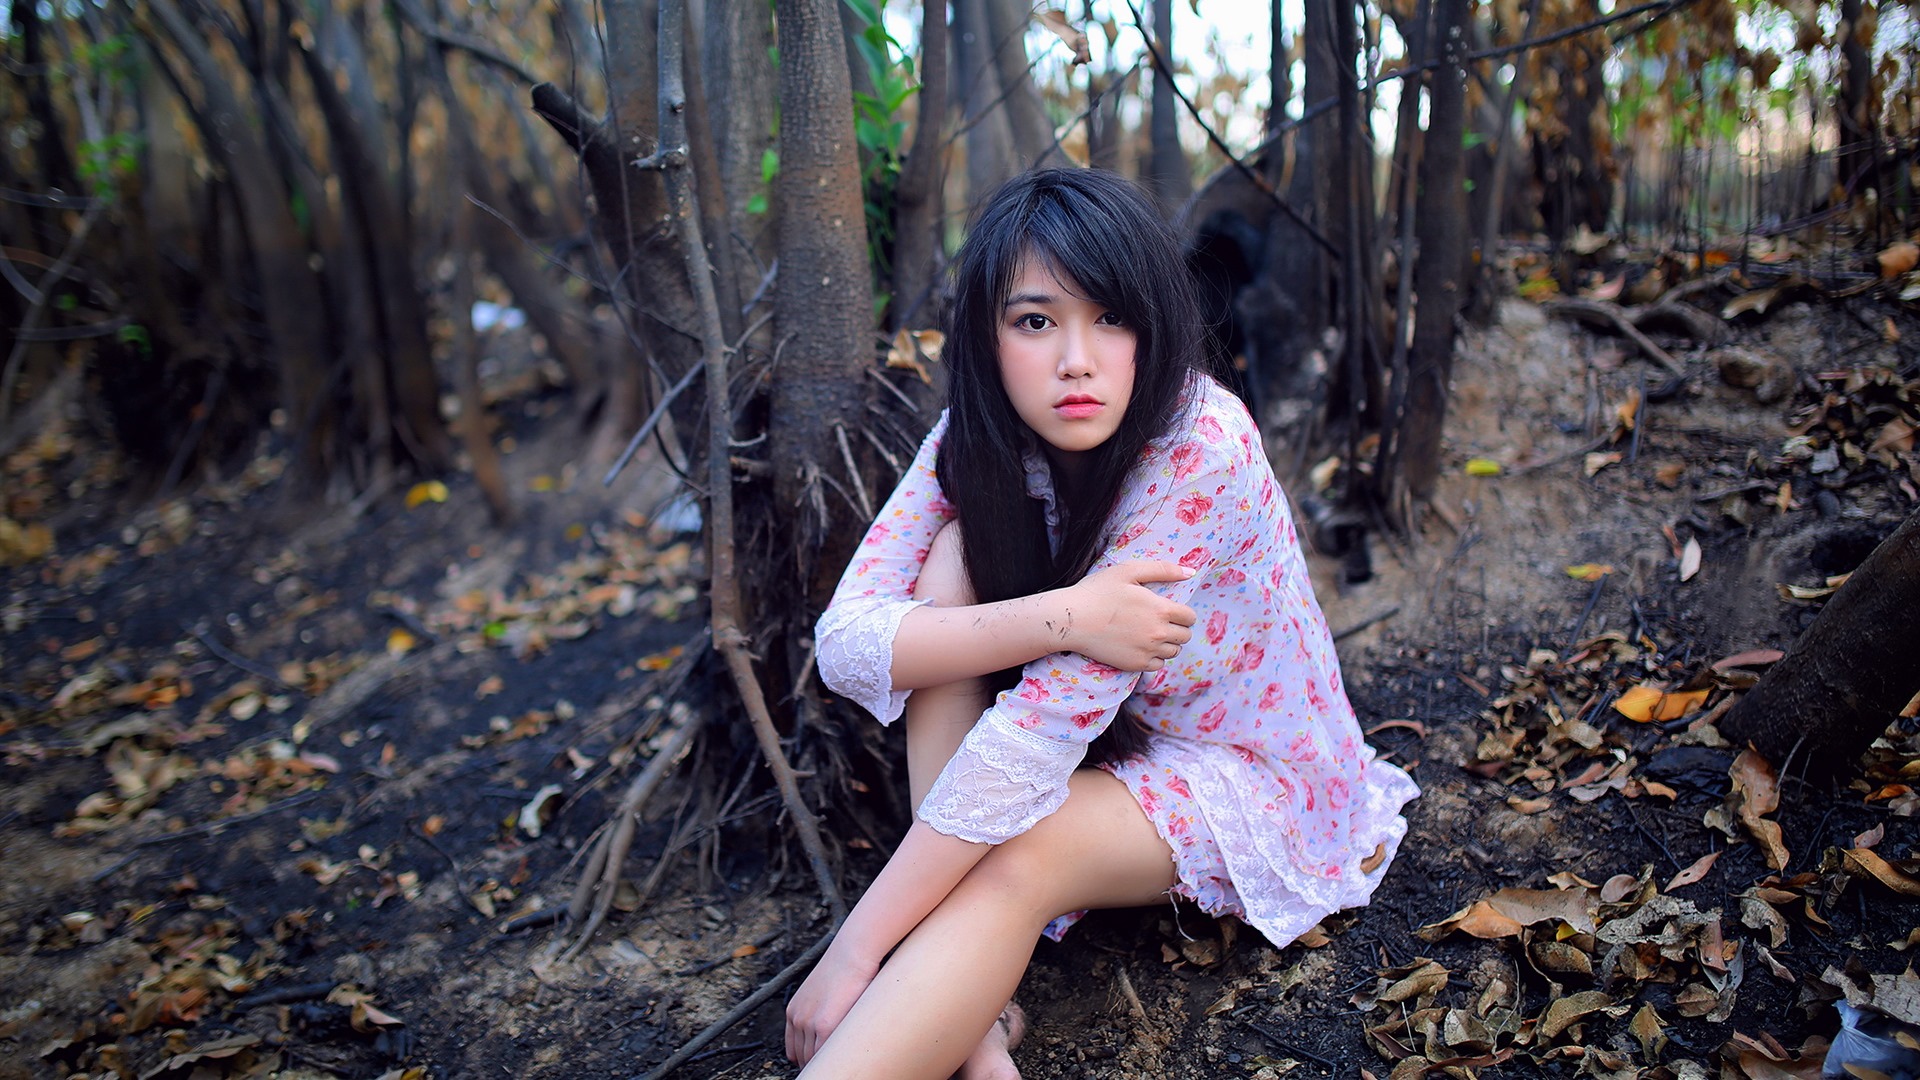 Pure and lovely young Asian girl HD wallpapers collection (1) #24 - 1920x1080